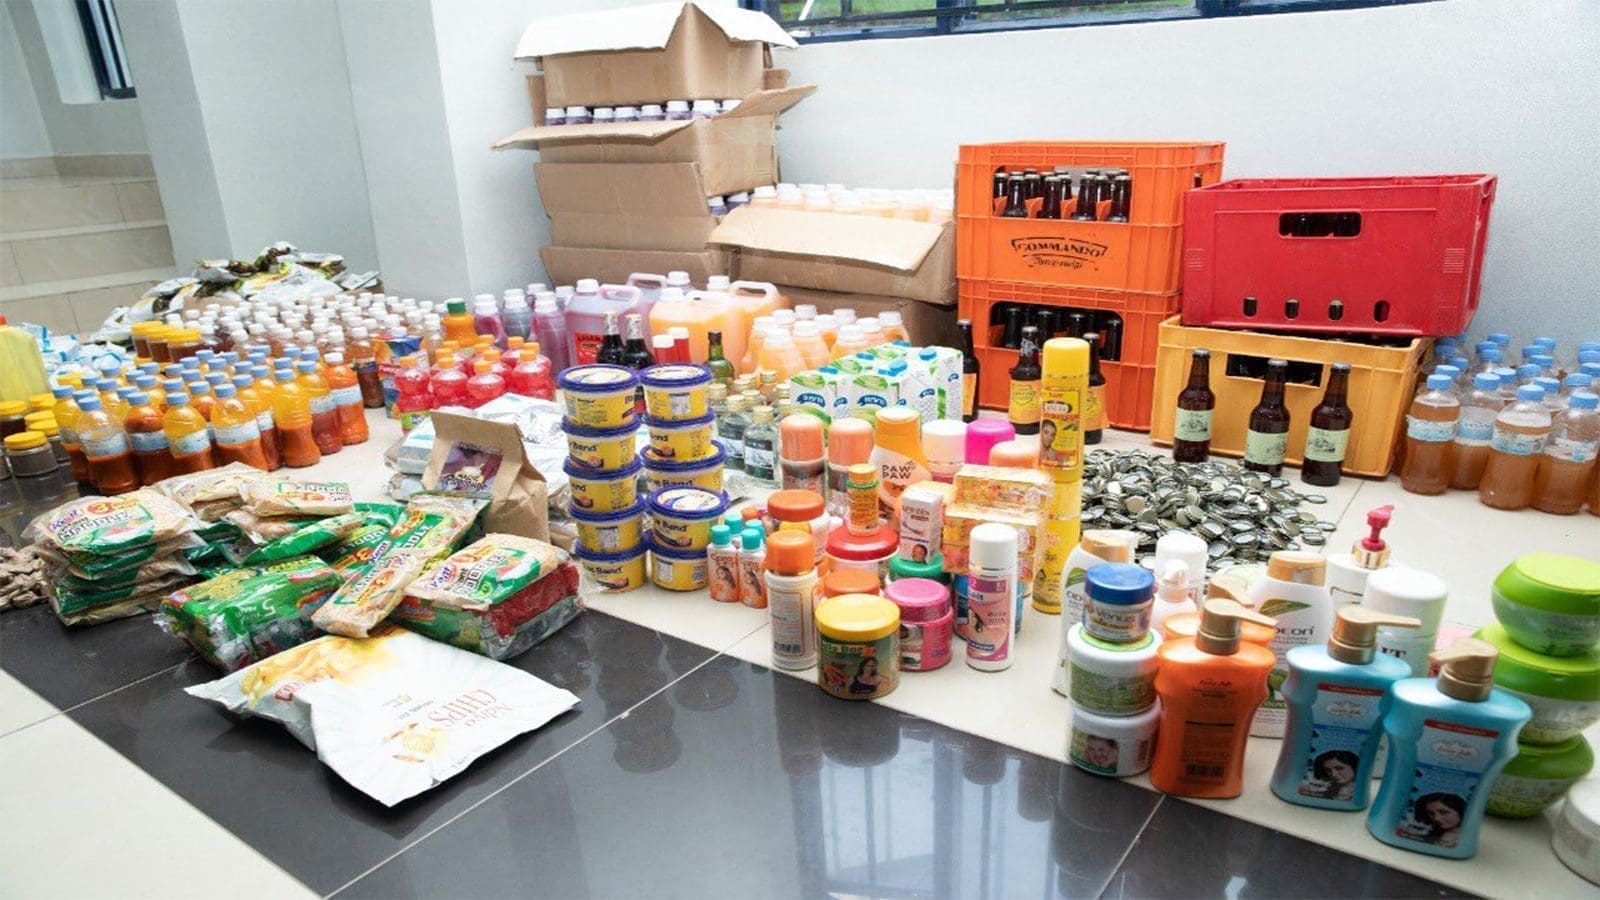 Rwandan authorities seize counterfeit products in country